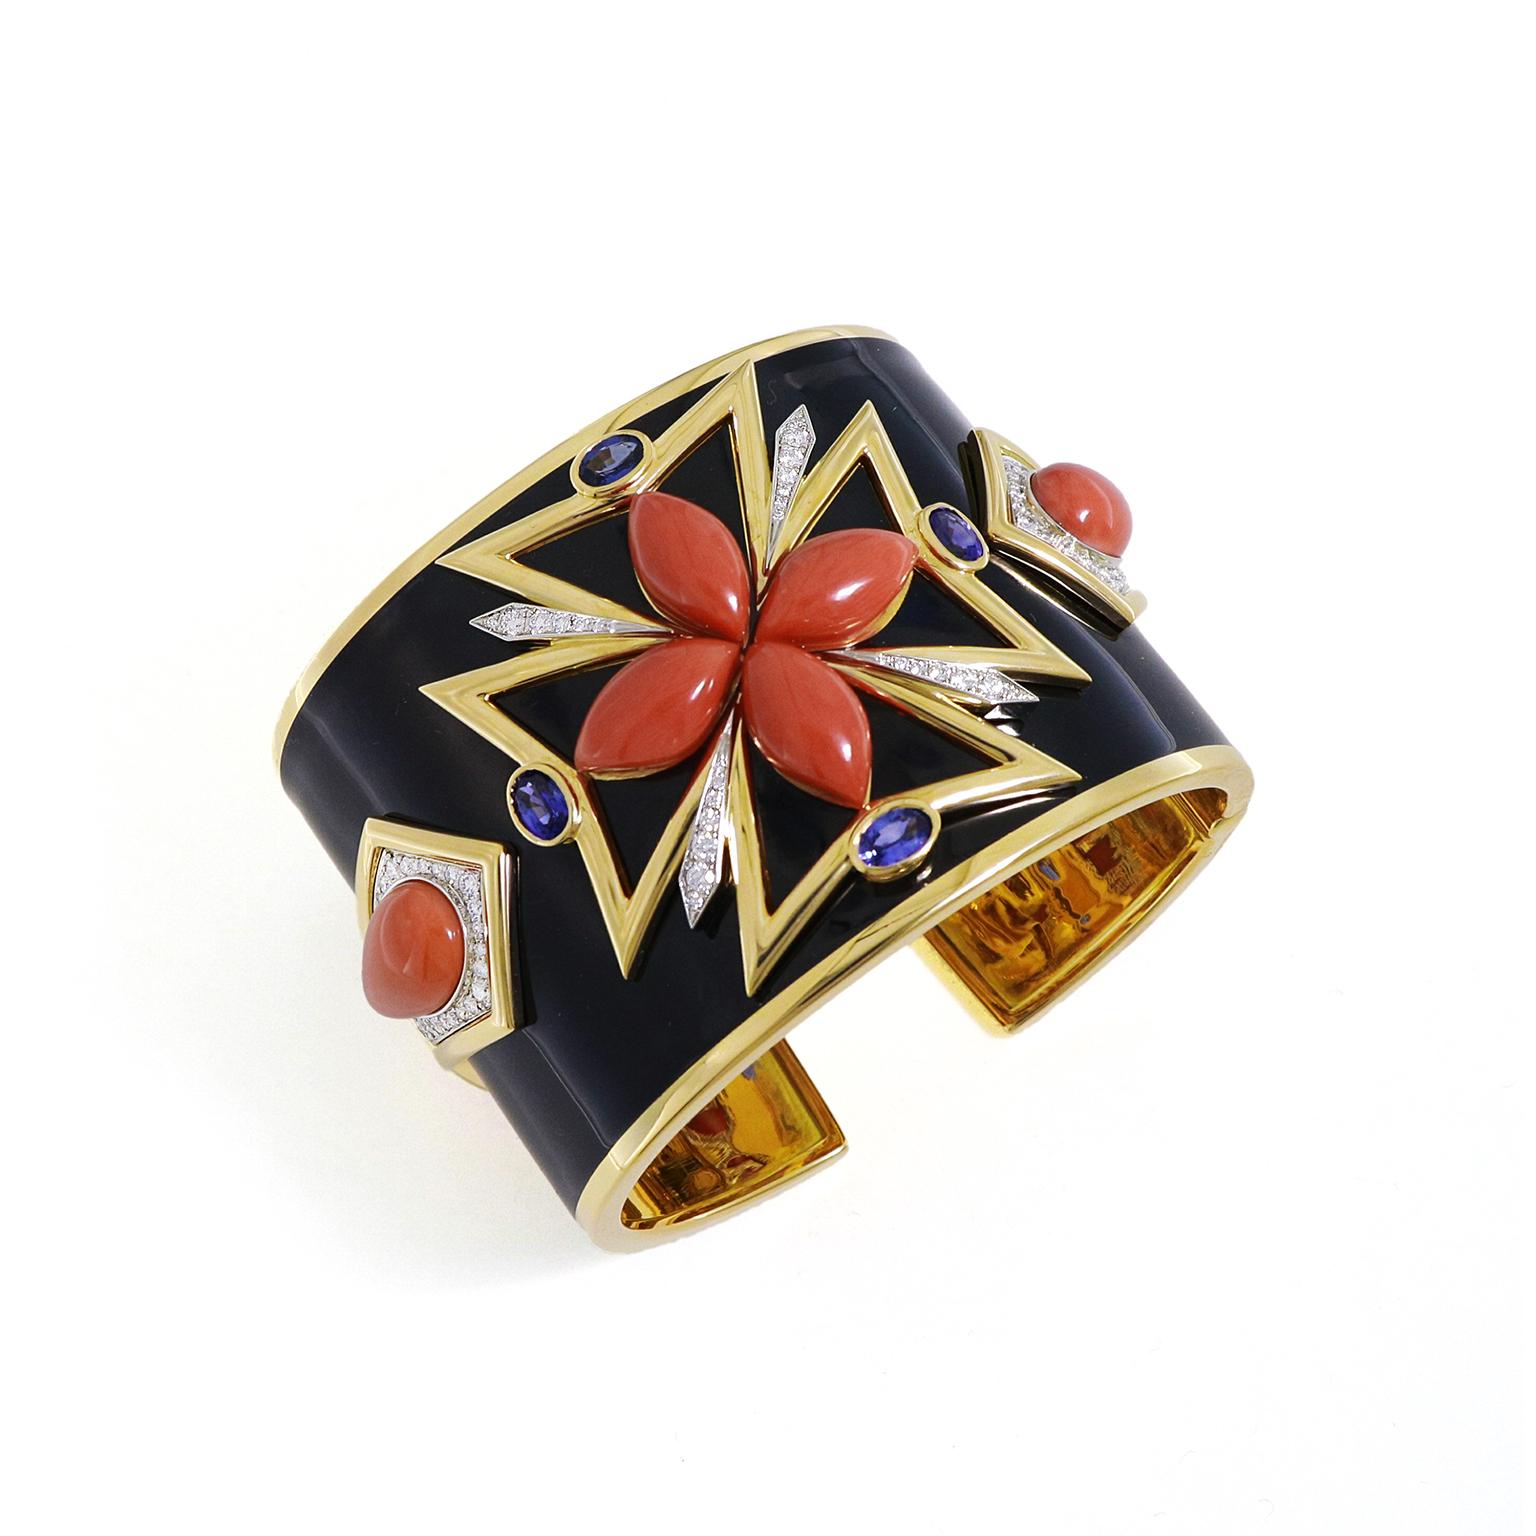 Daring colors of gems give this bracelet a striking design. An 18k yellow gold cuff is covered with black enamel, allowing the gold to glint on the top and bottom. In the middle, precious metal creates a Maltese cross with oval sapphires accenting